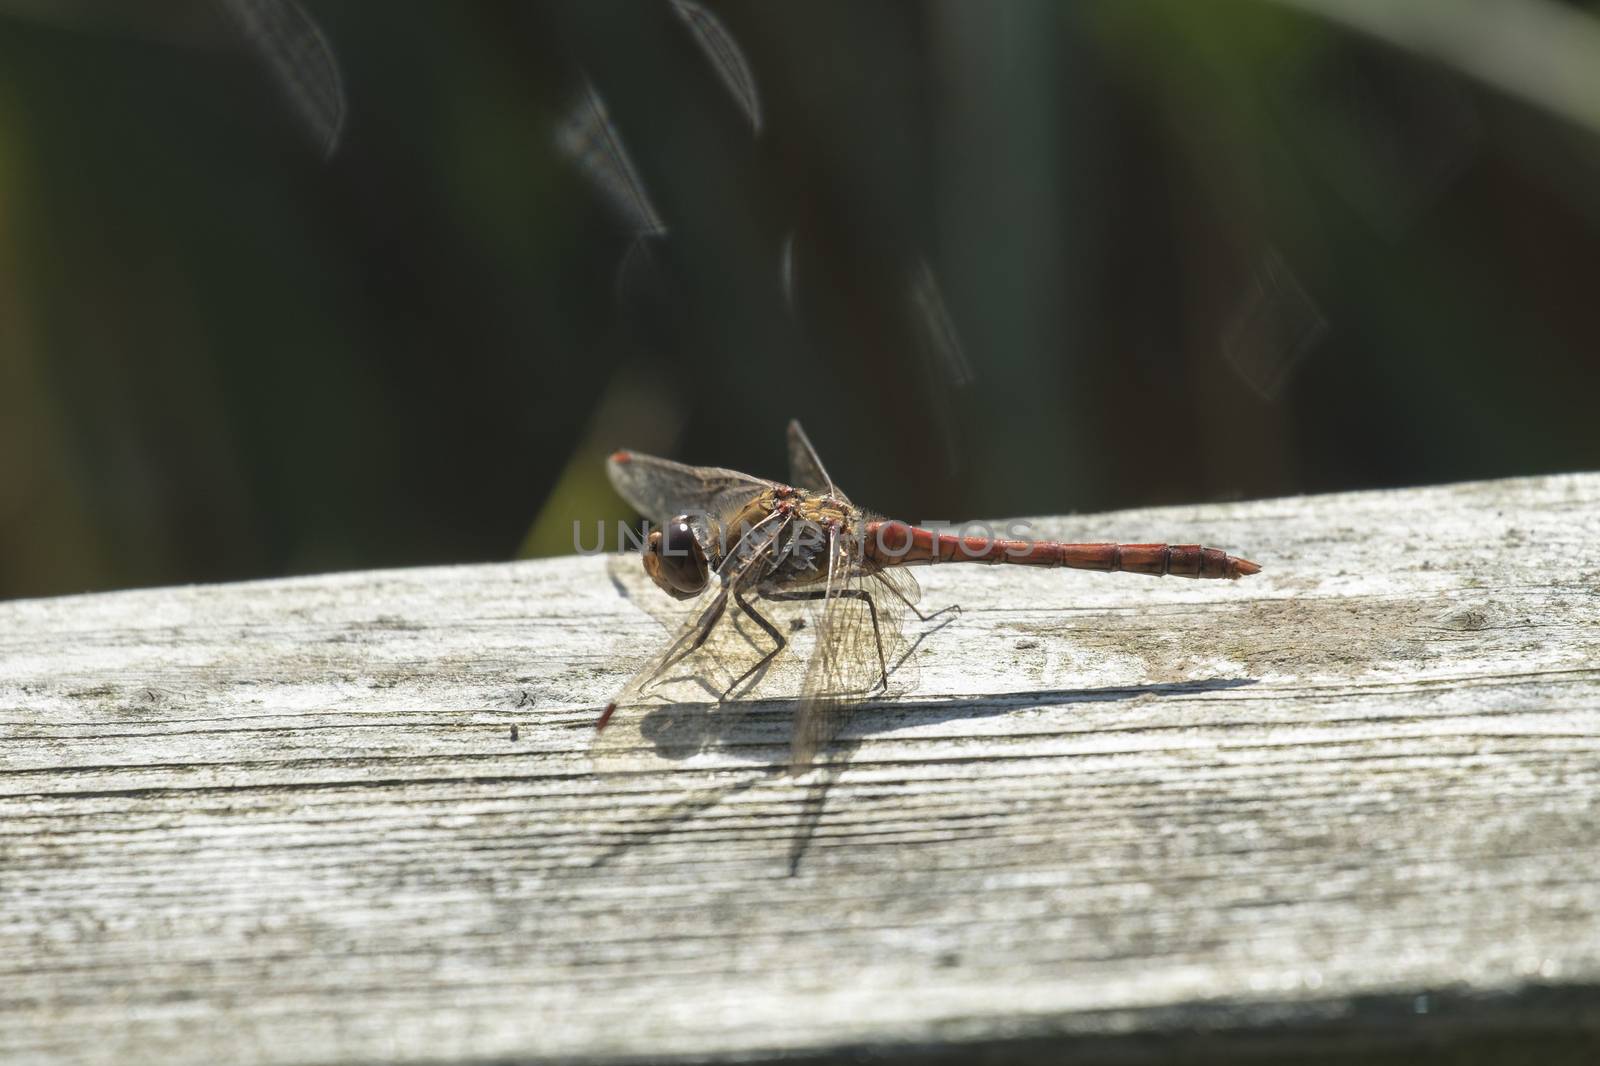 common darter dragonfly at rest on wooden bar